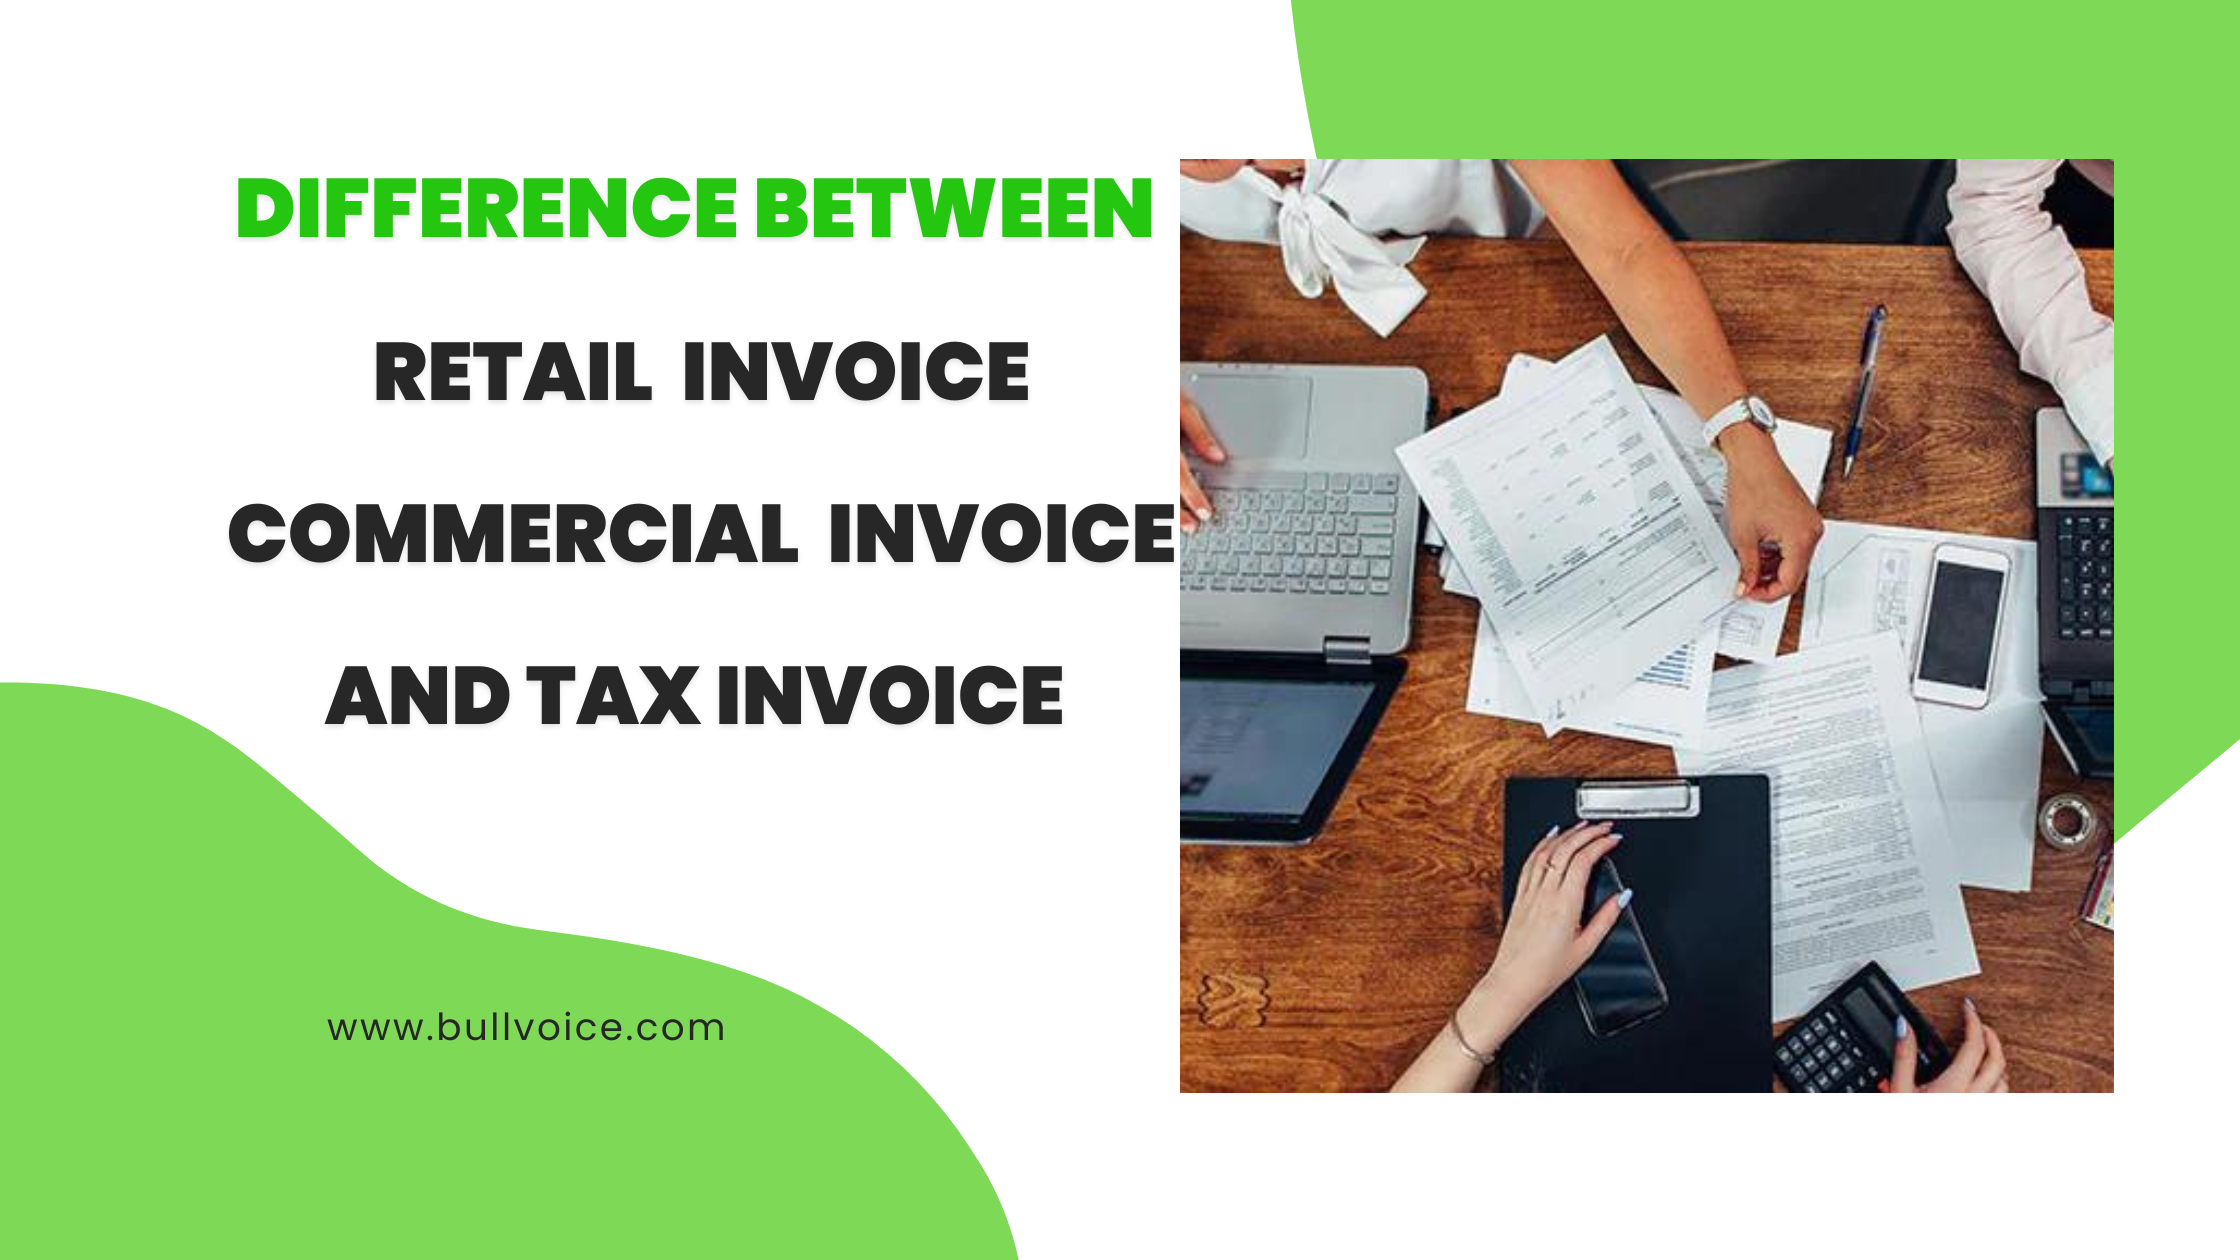 Difference between retail invoice, commercial invoice, proforma invoice and tax invoice